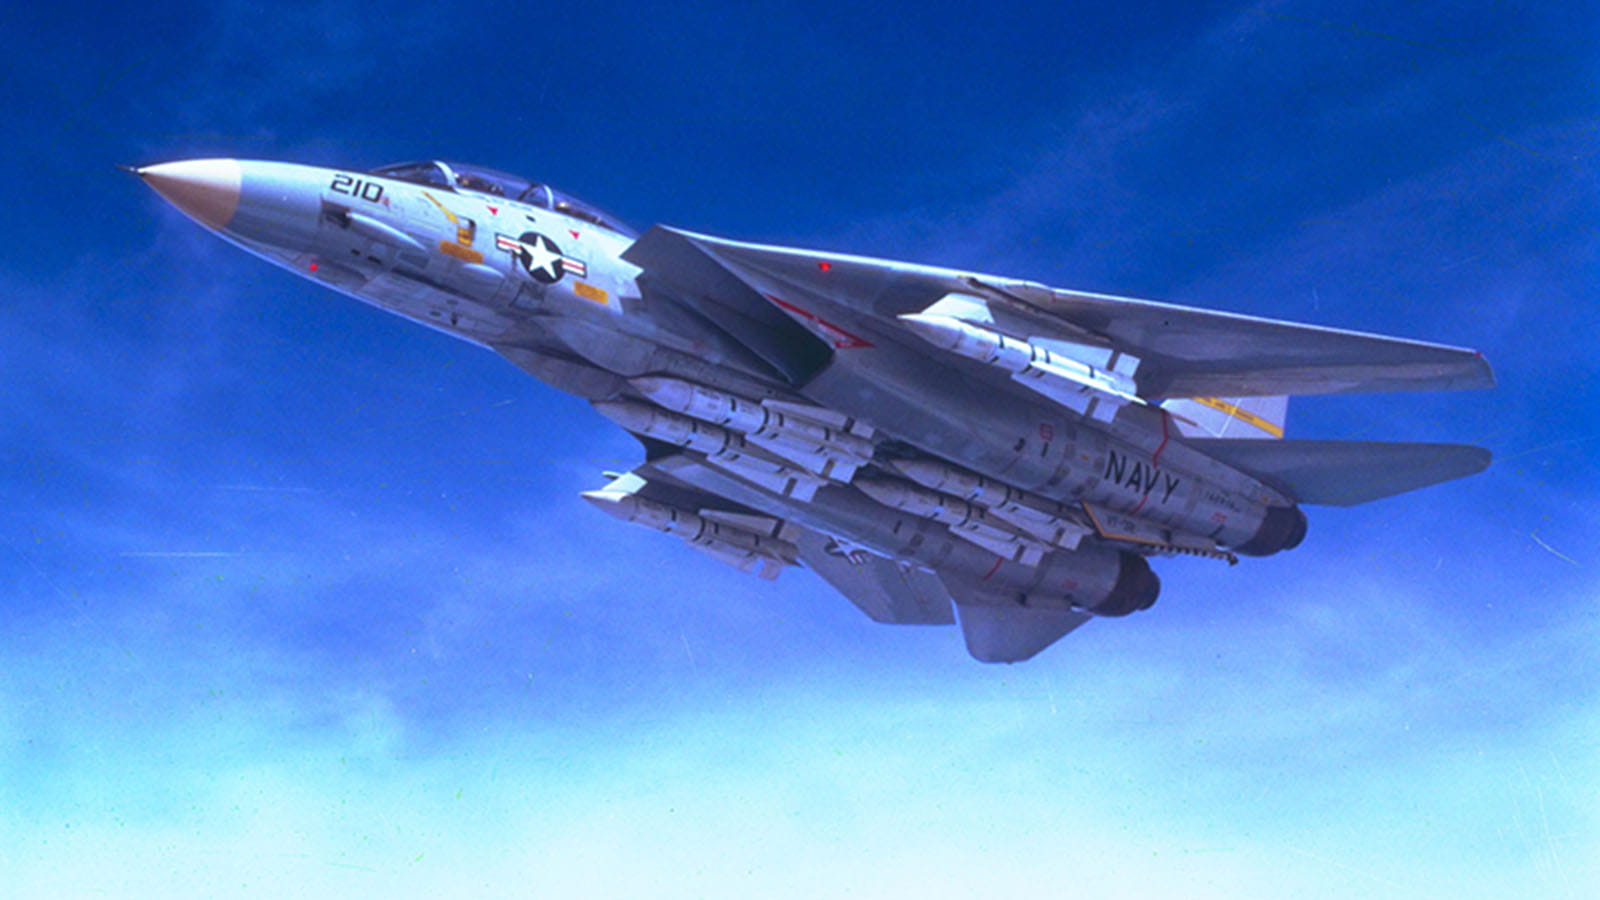 The Grumman F-14 Tomcat featured the AWG-9 Fire Control System and later the APG-71 radar system.